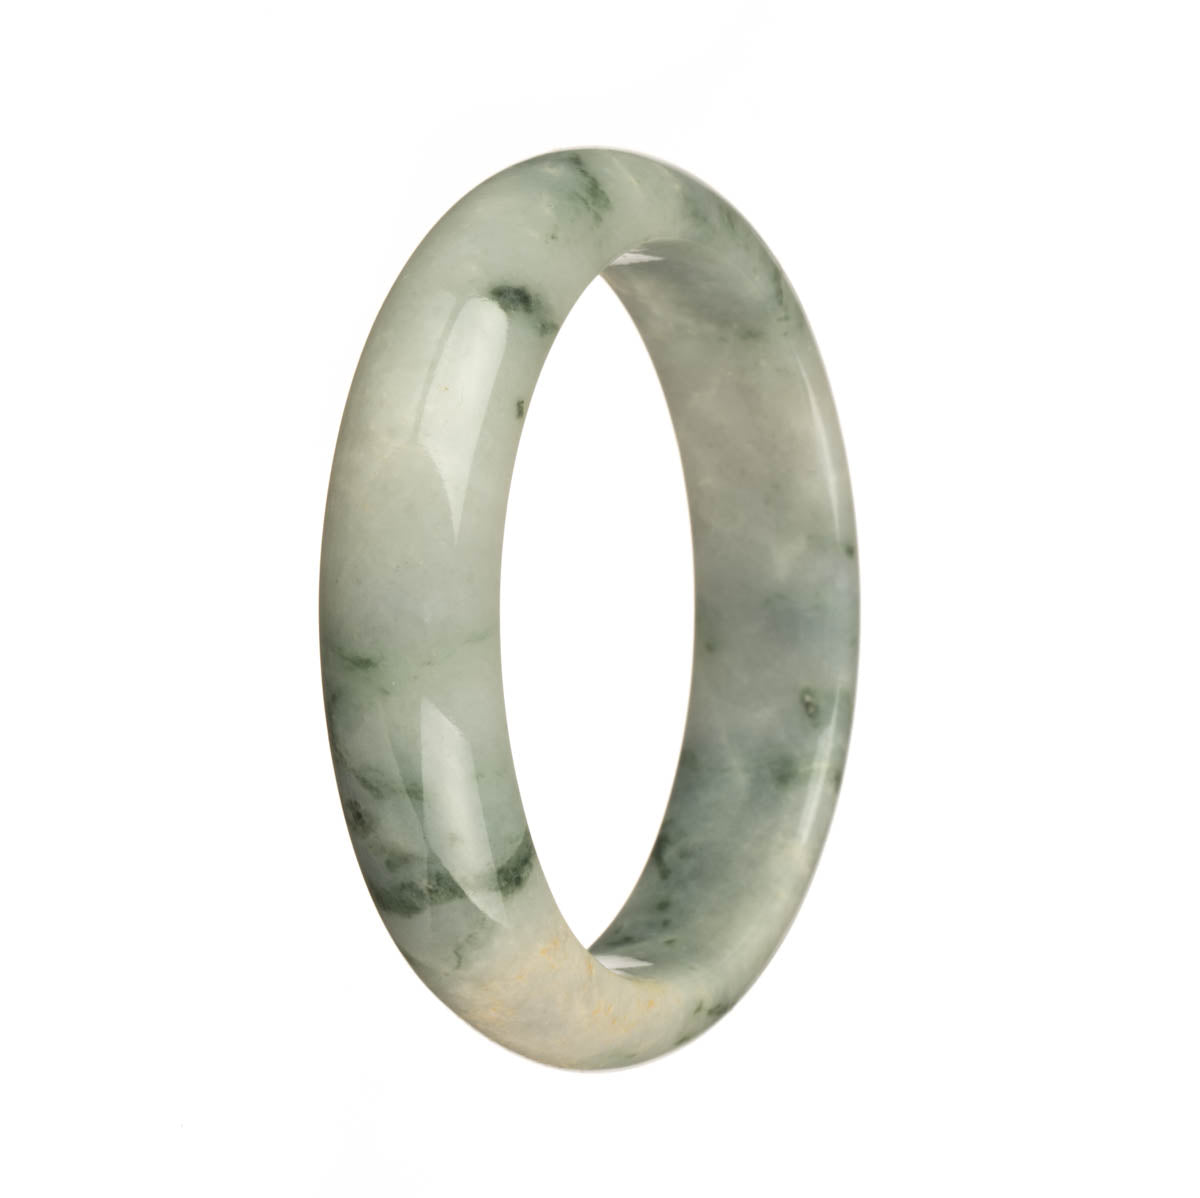 A stunning Burmese jade bracelet with a half moon design, showcasing genuine untreated white jade with a beautiful green pattern. Crafted by Mays Gems.